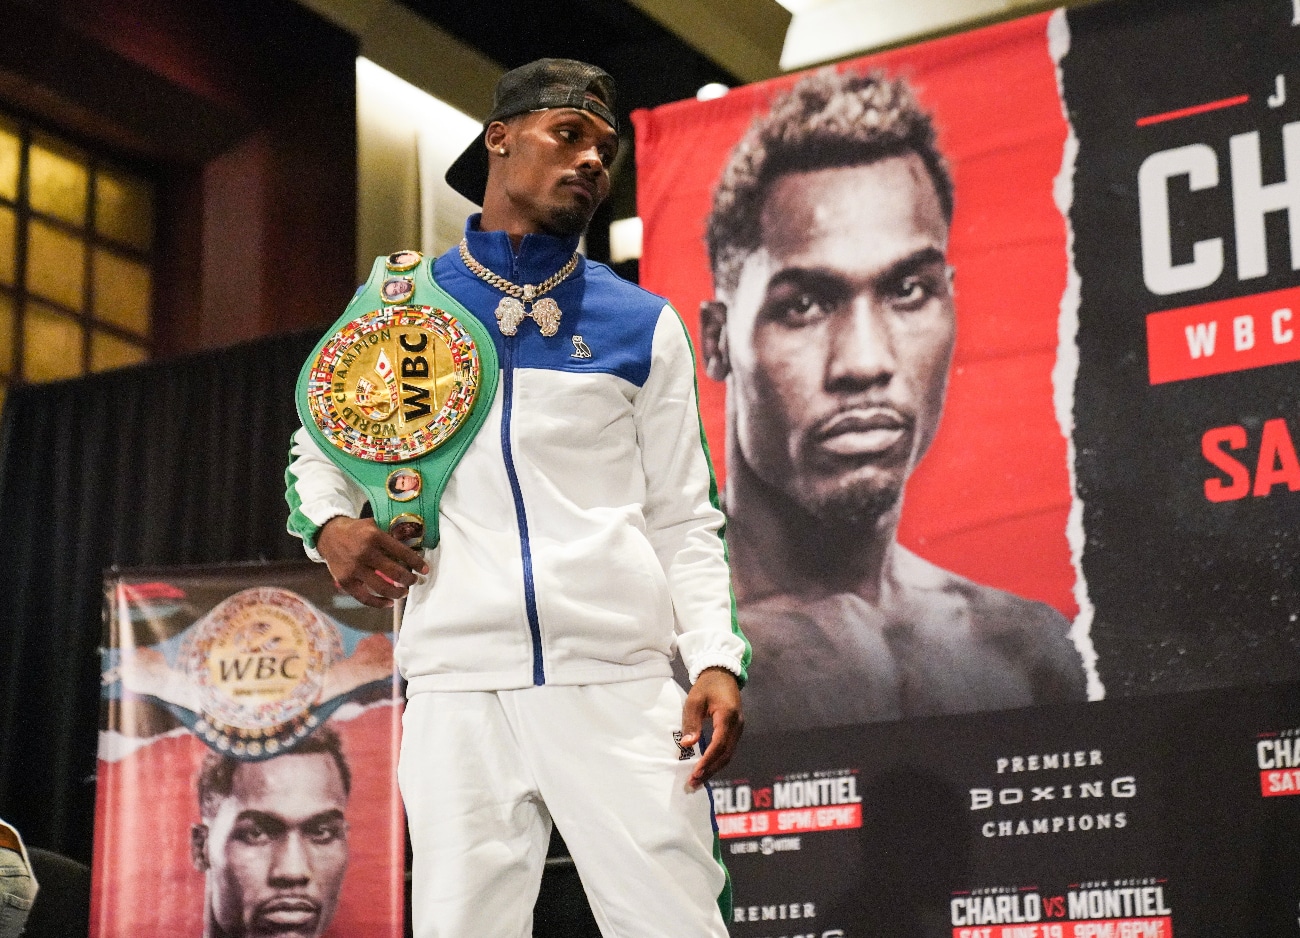 Image: Jermall Charlo vs. Juan Montiel - analysis & prediction by Austin Trout